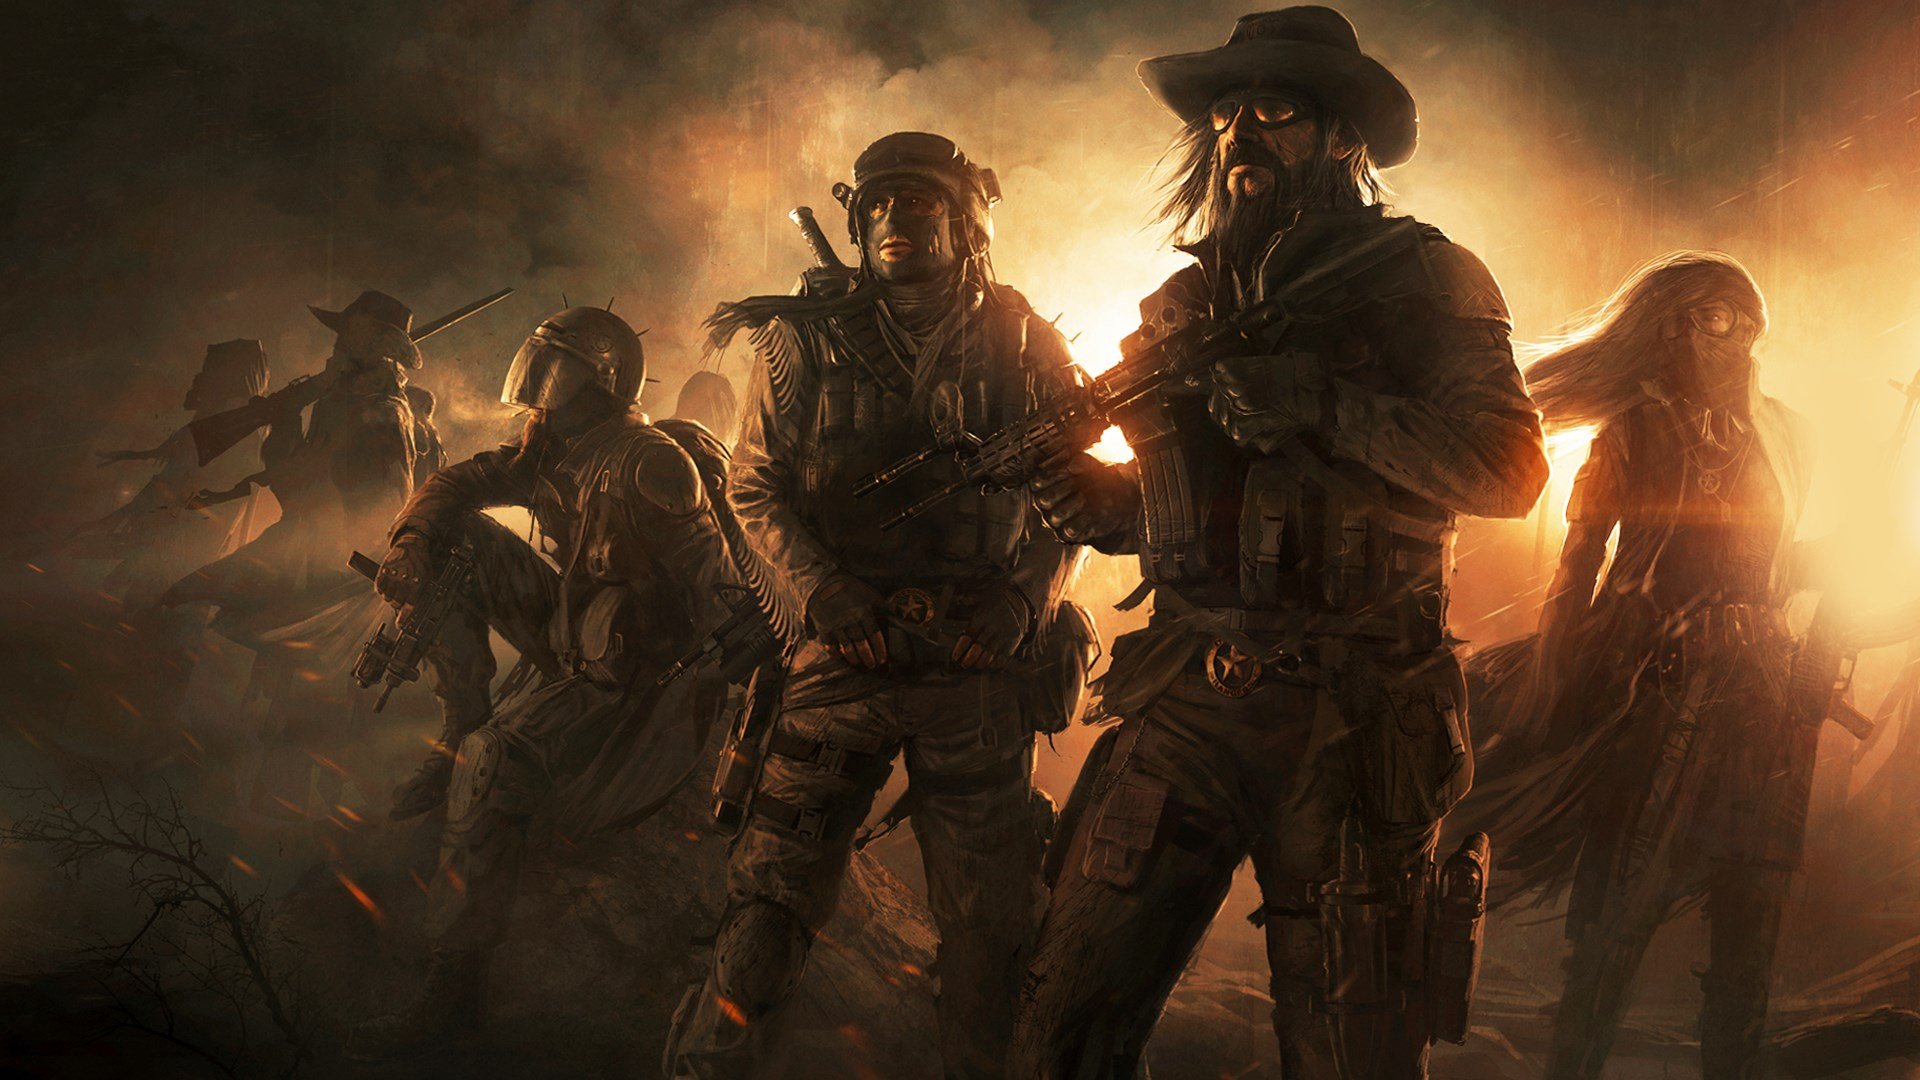 Wasteland 2: Director's Cut cover image